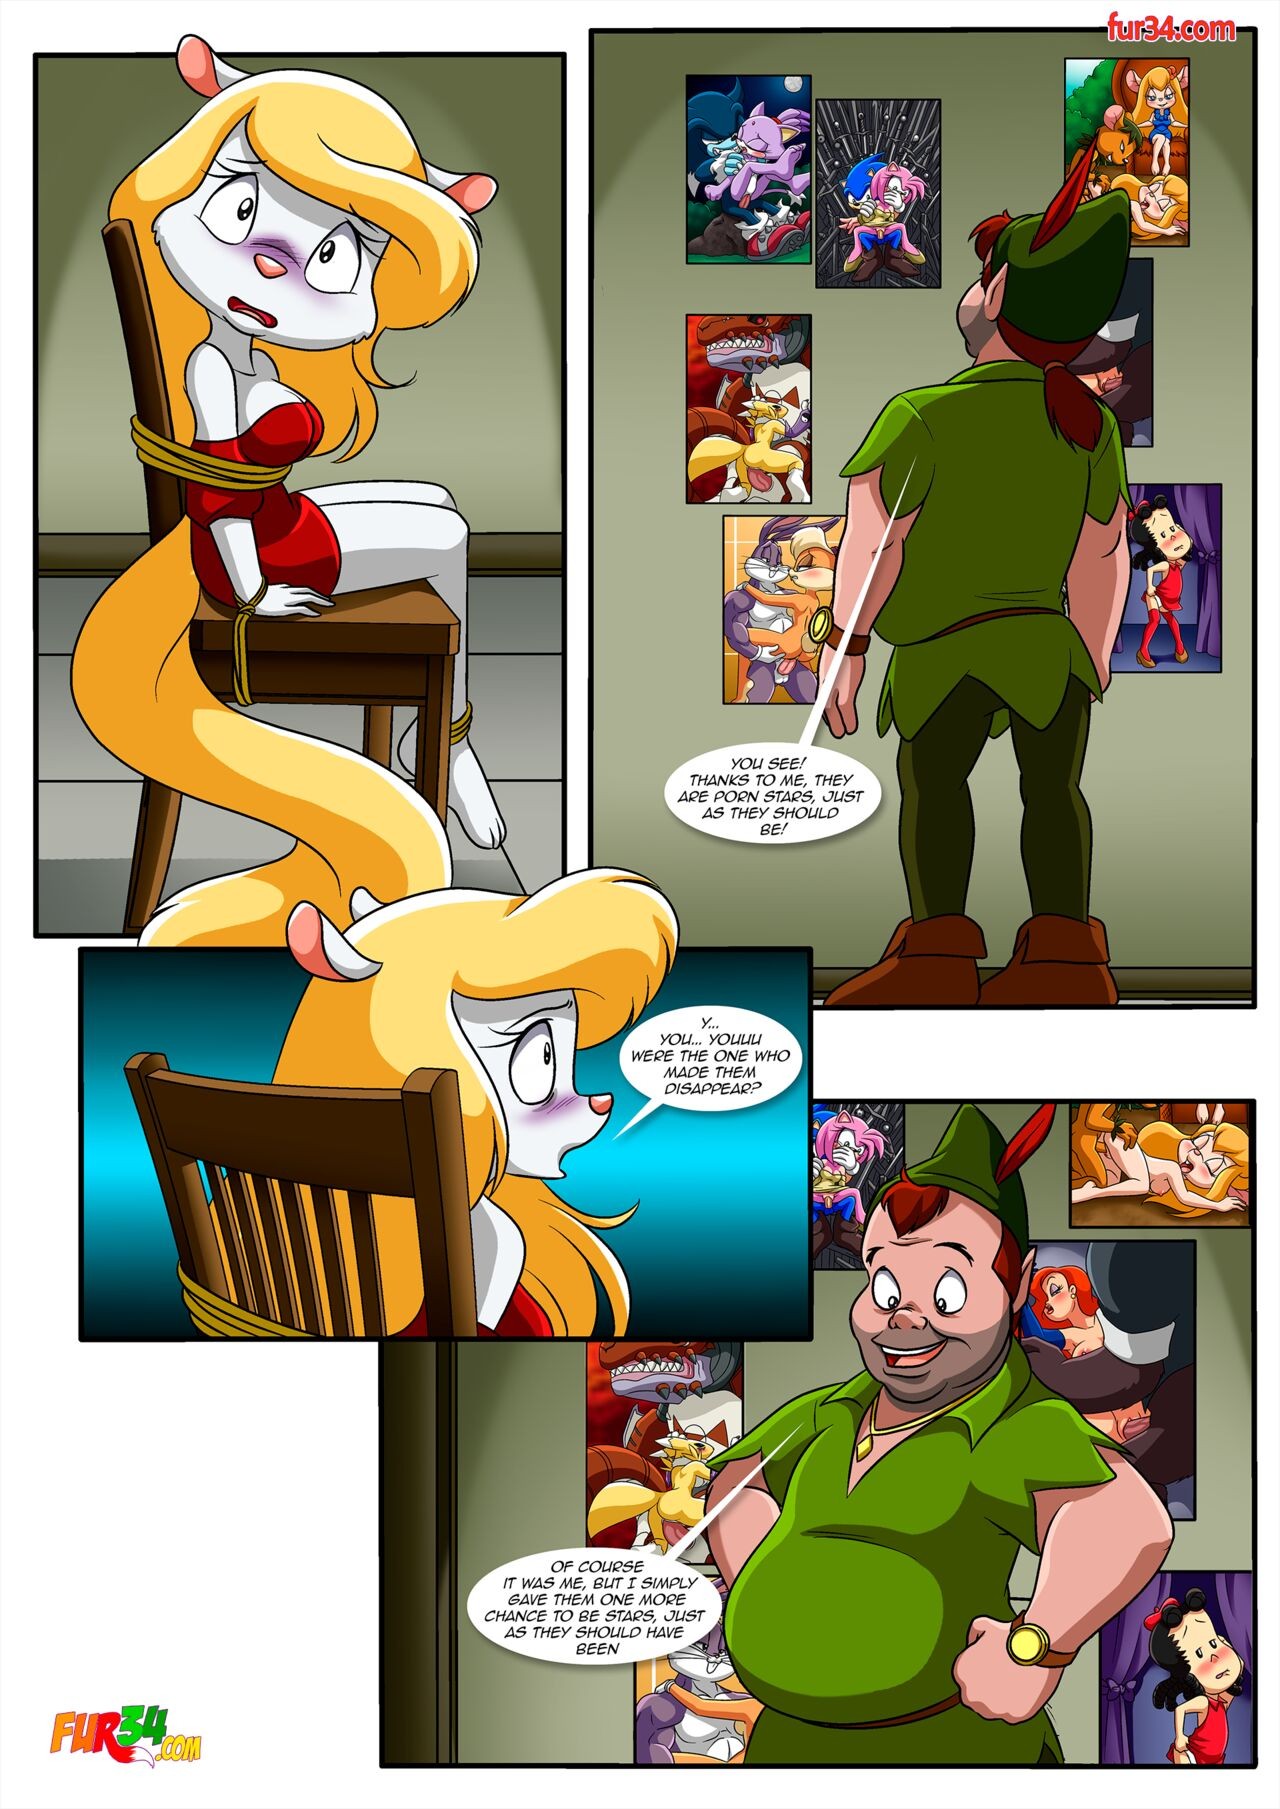 Minerva Mink: Out Of Service!  Porn Comic english 09